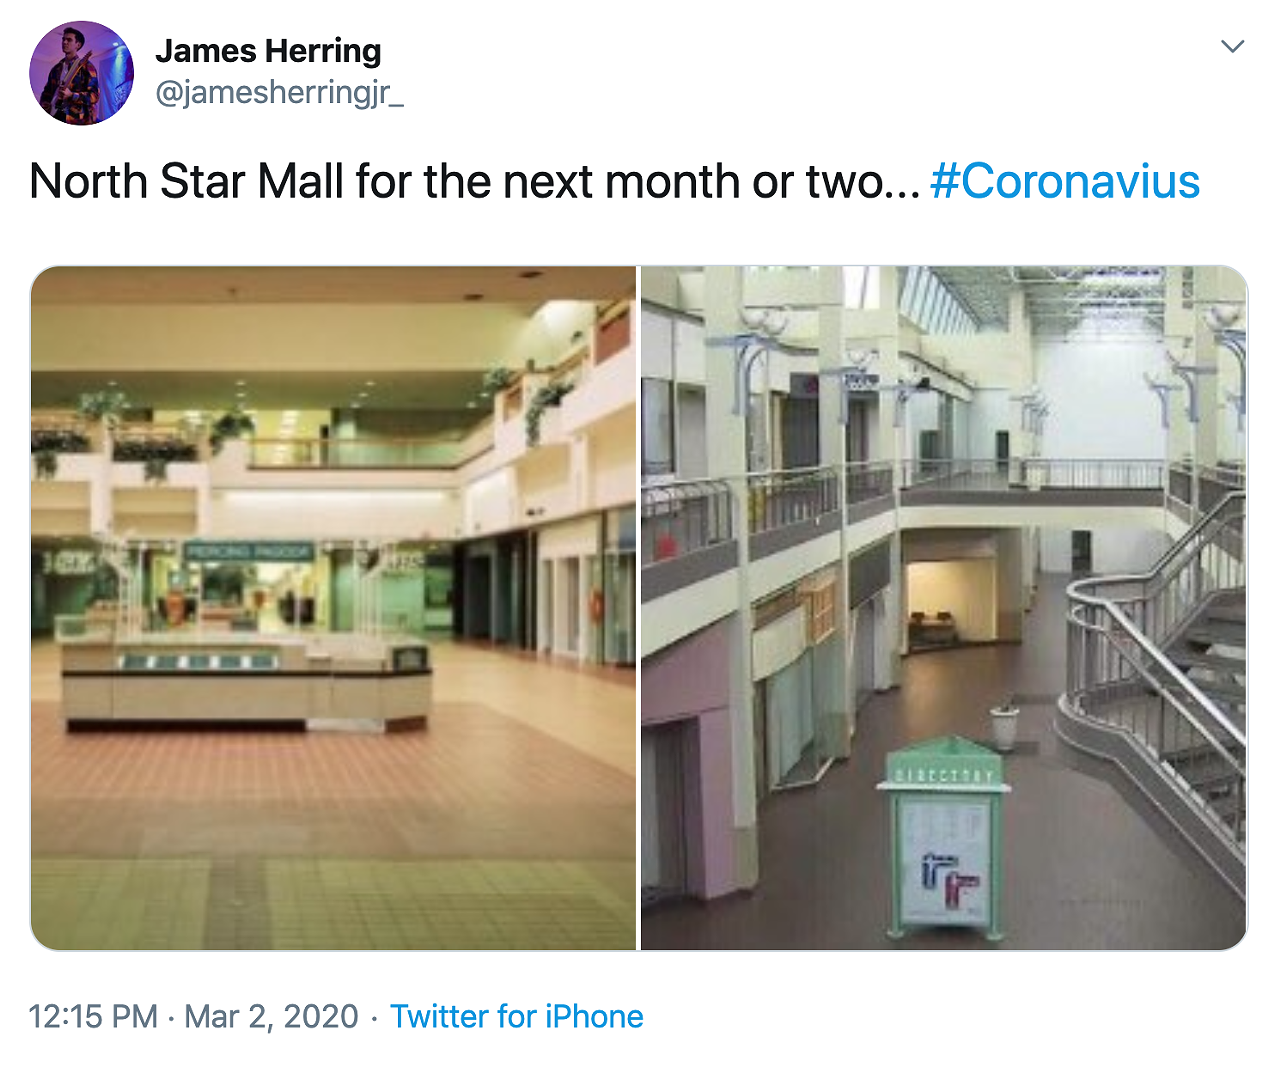 North Star Mall Reopens After Deep Cleaning Following Coronavirus Patient  Visit